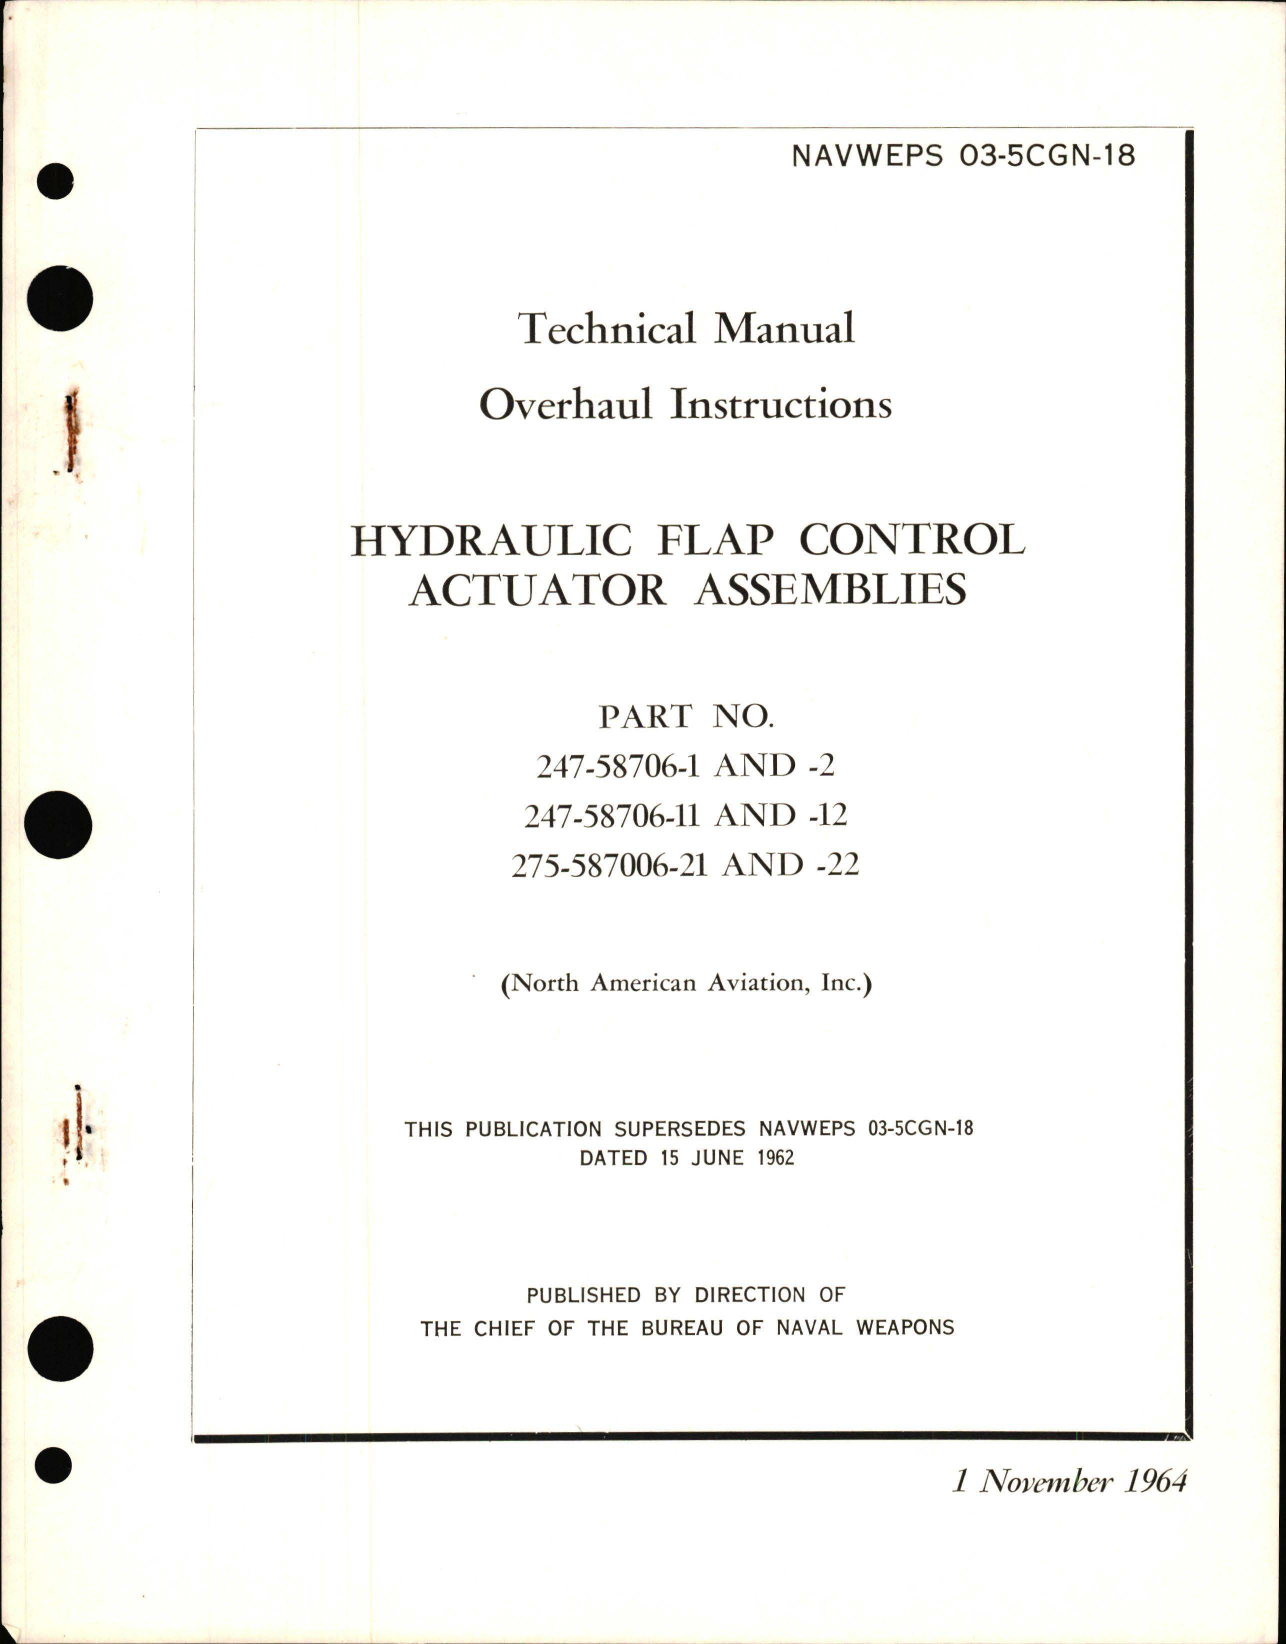 Sample page 1 from AirCorps Library document: Overhaul Instructions for Hydraulic Flap Control Actuator Assemblies - Part 247-58706 Series 